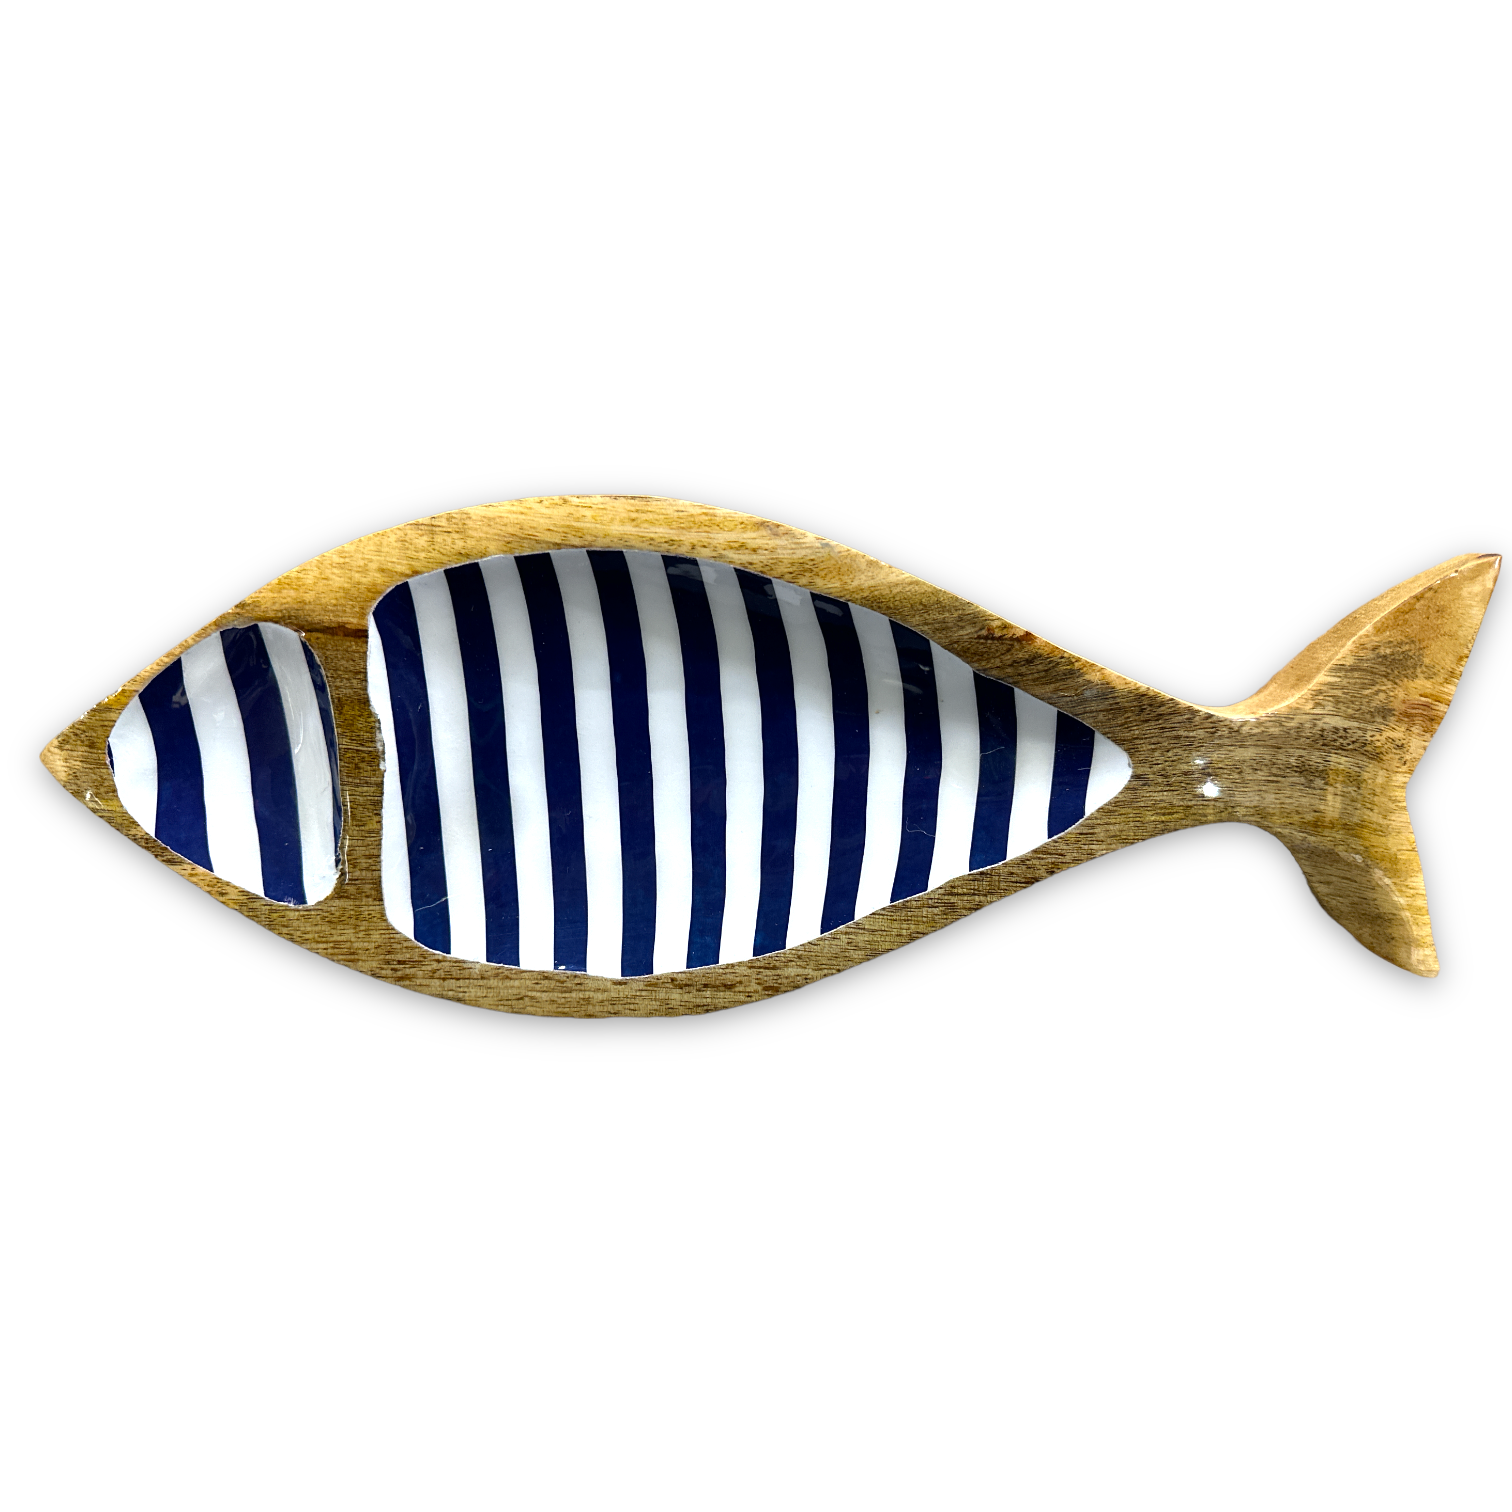 Cabana Striped Blue and White Fish Shaped Tray - Wood with Enamel - 13-1/2-in - Mellow Monkey